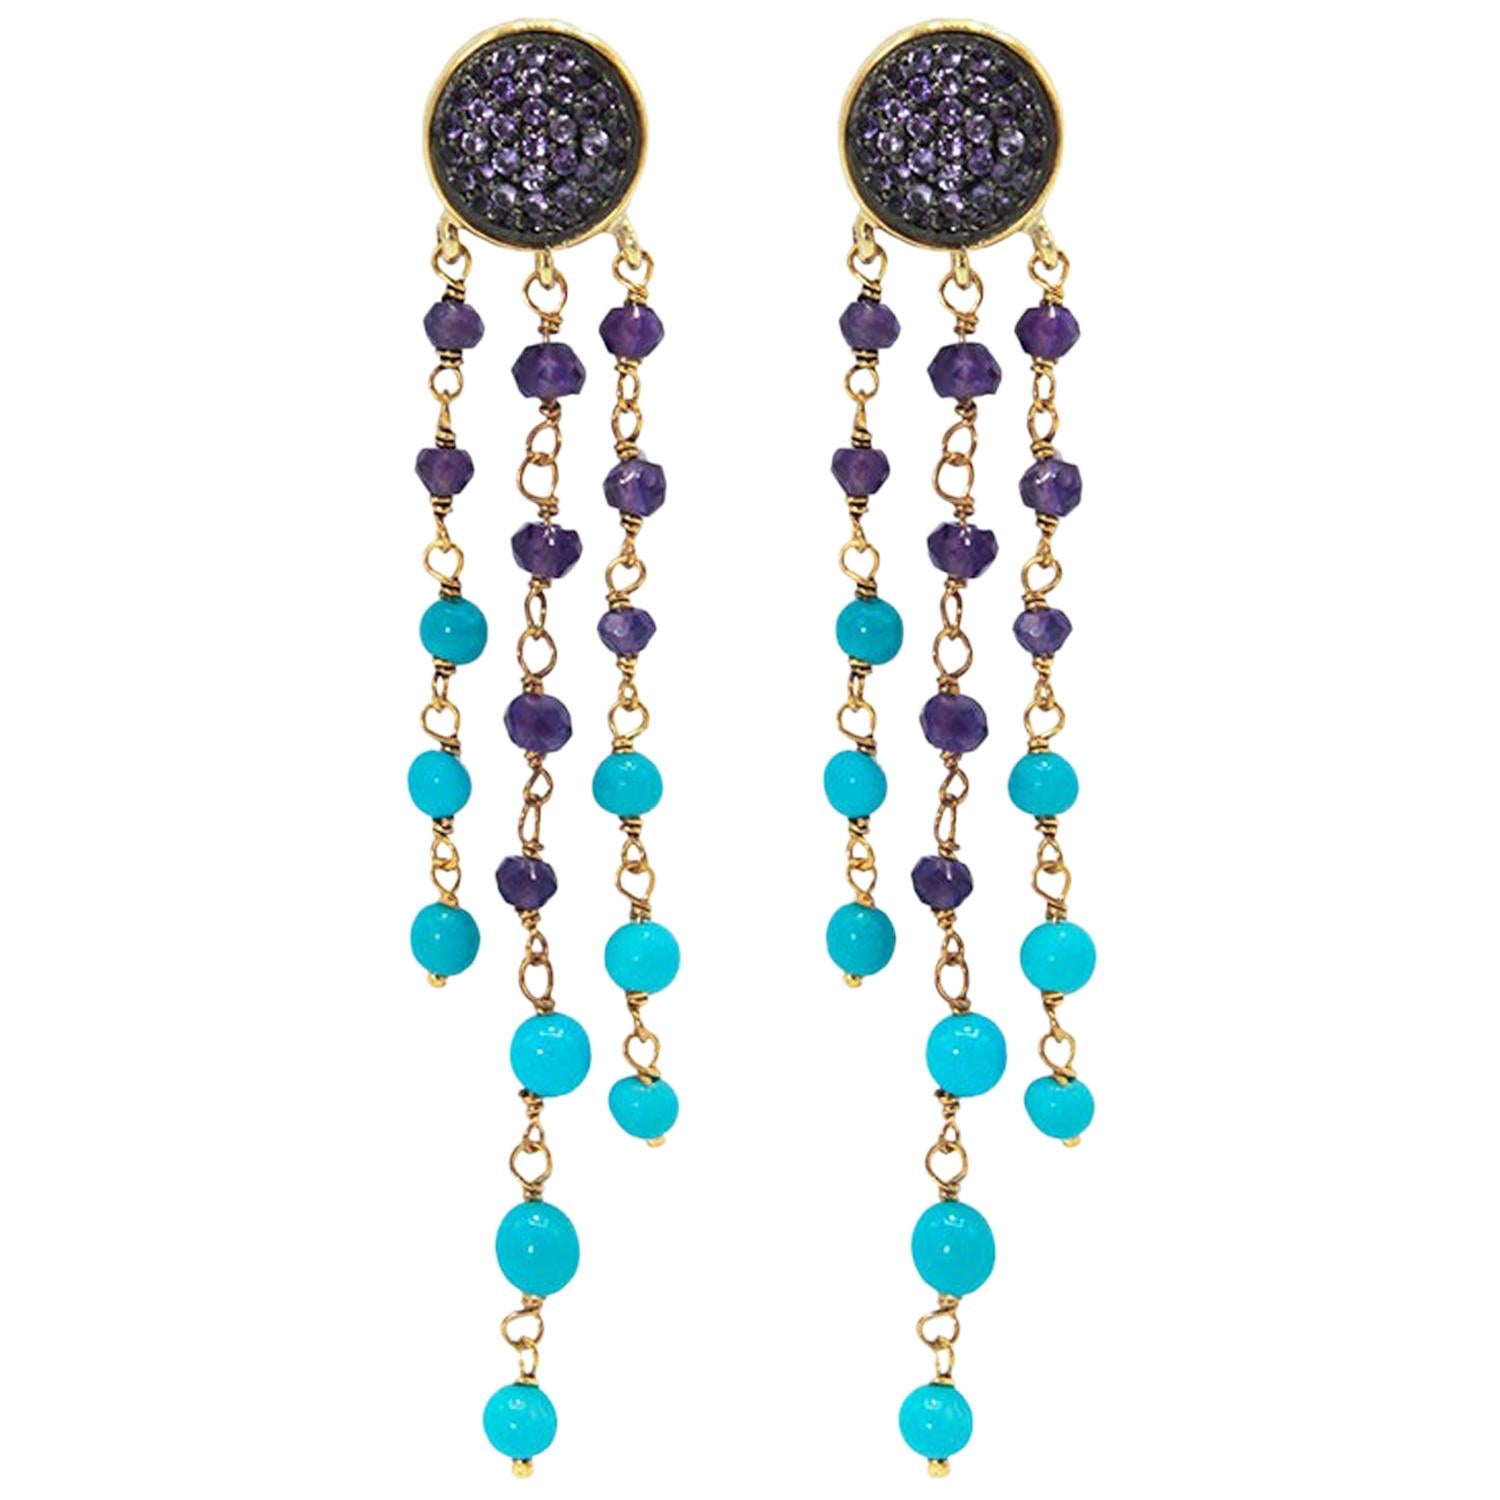 Dangle Earrings in 925 Silver, Amethyst Paves and Turquoise and Amethyst Beads